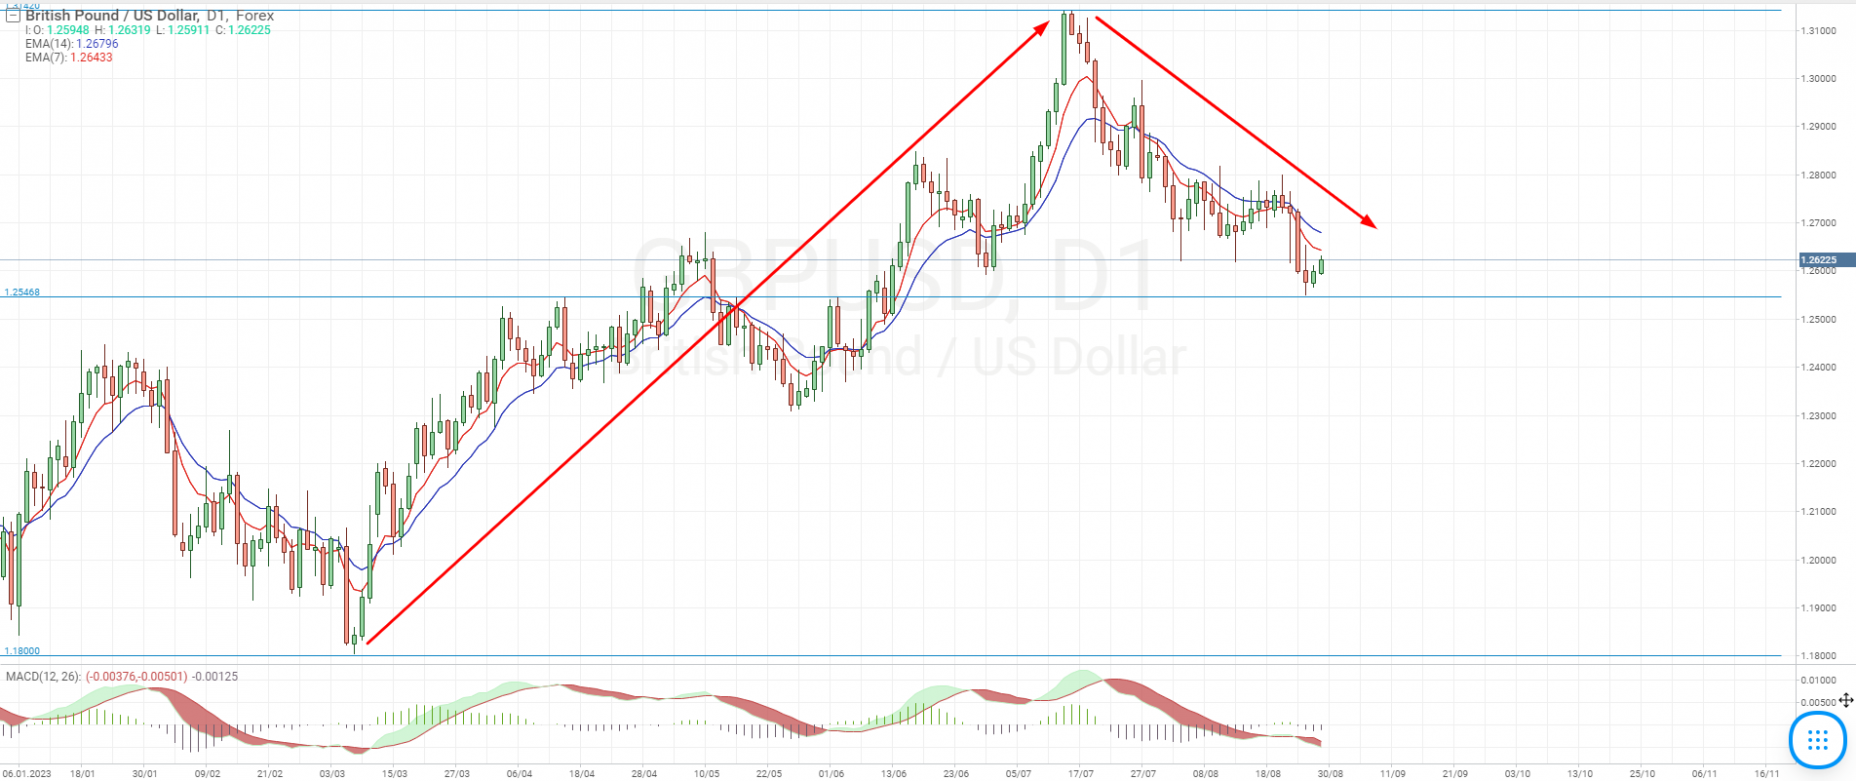 GBP/USD currency pair chart